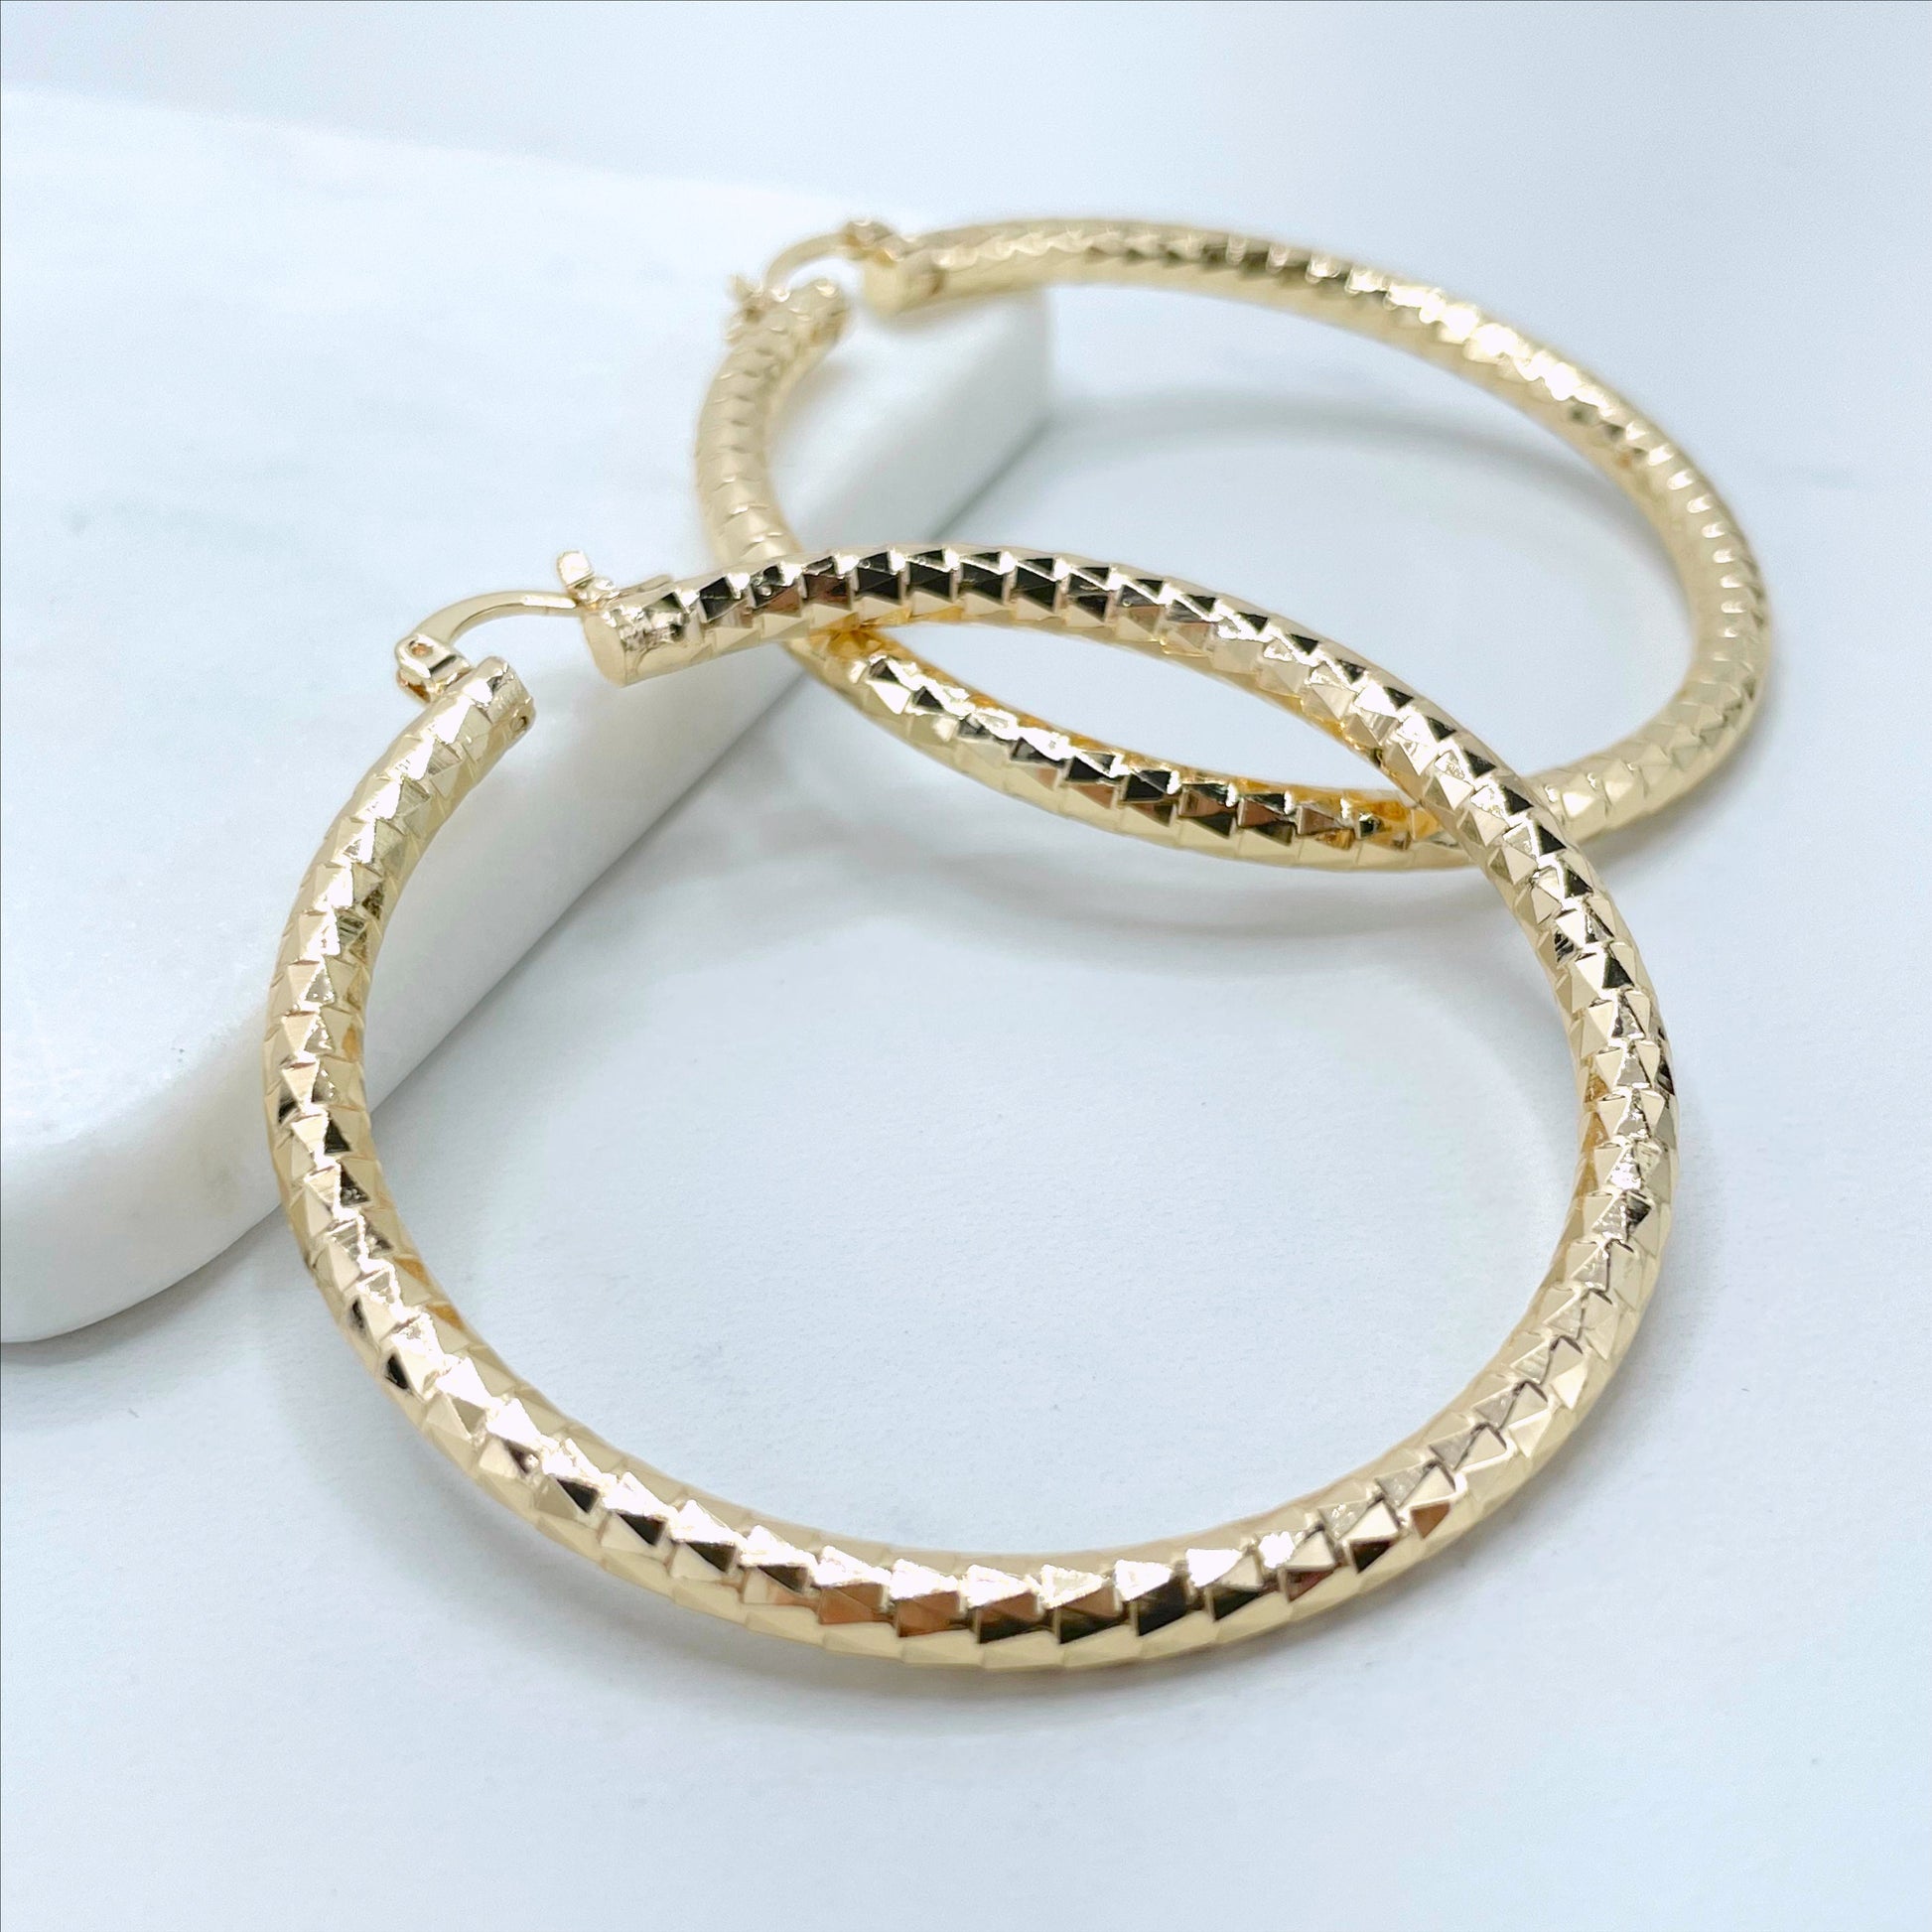 18k Gold Filled 58mm Textured Hoops  Earrings, 4mm Thickness Wholesale Jewelry Making Supplies